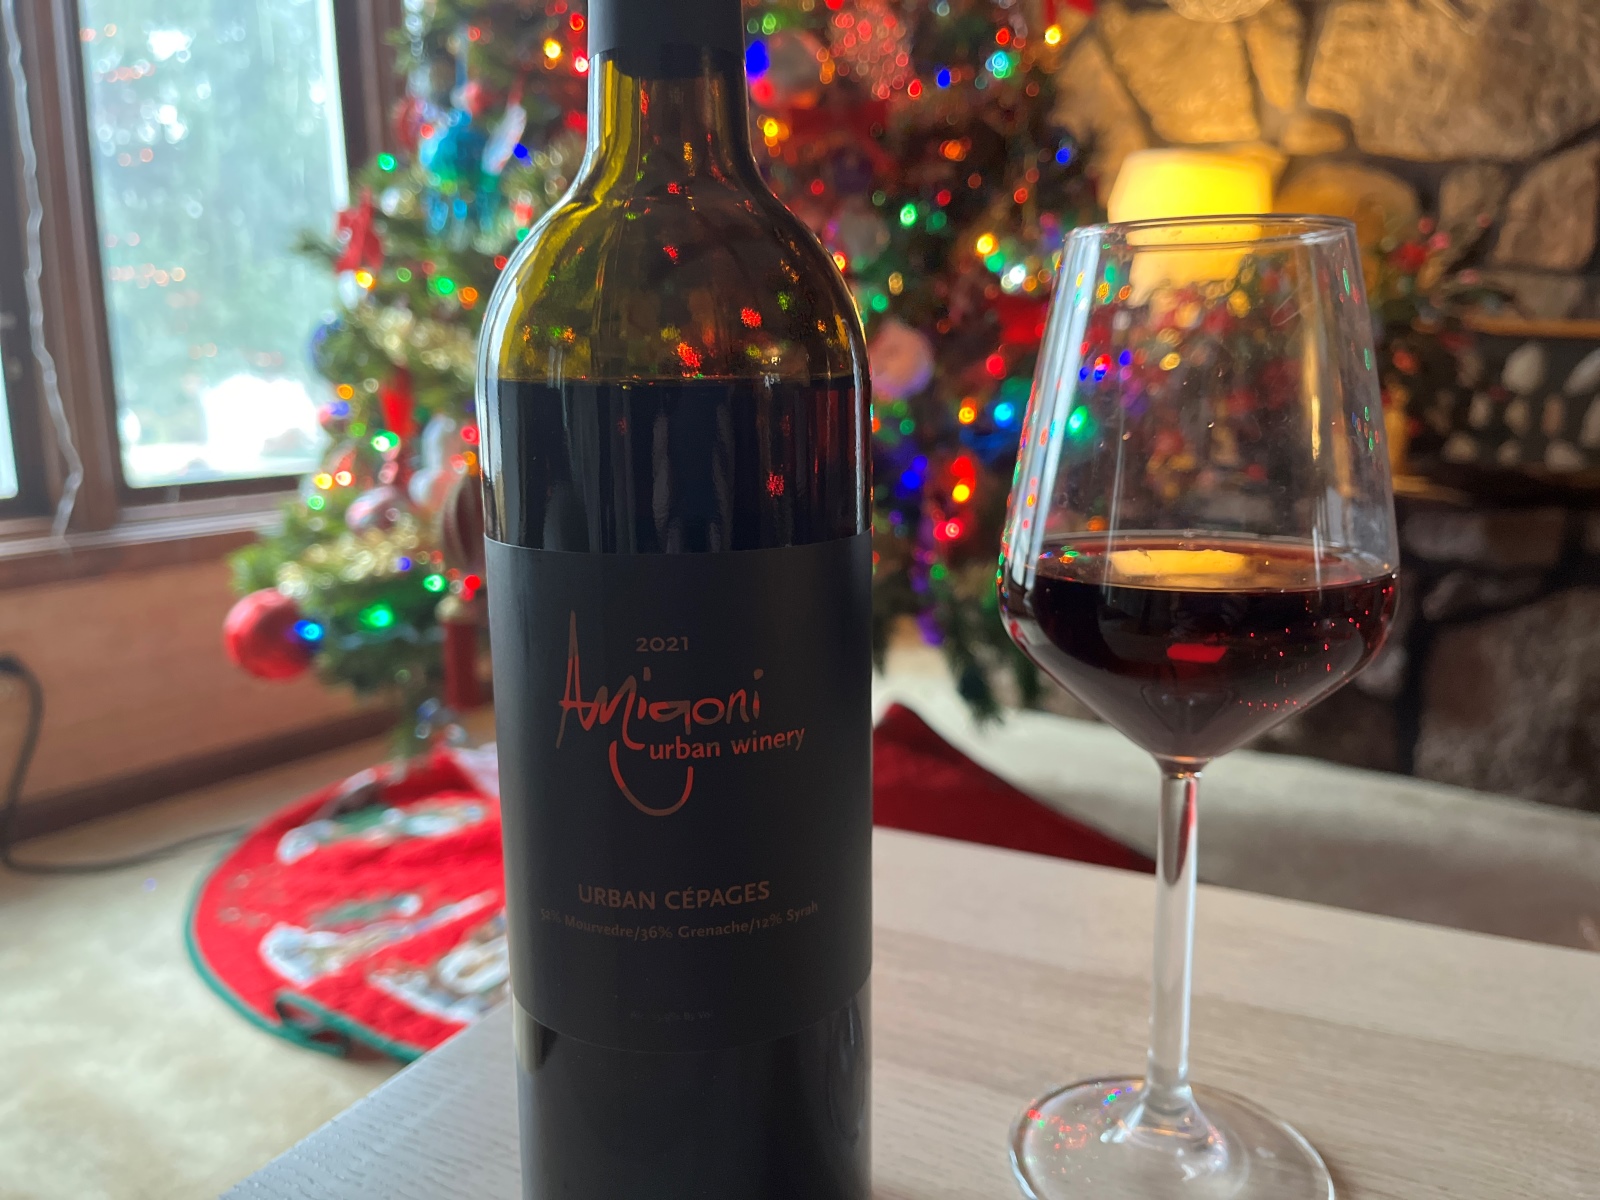 A bottle of Amigoni Urban Winery wine sits on a table, next to a half-full wine glass. In the background is a Christmas tree